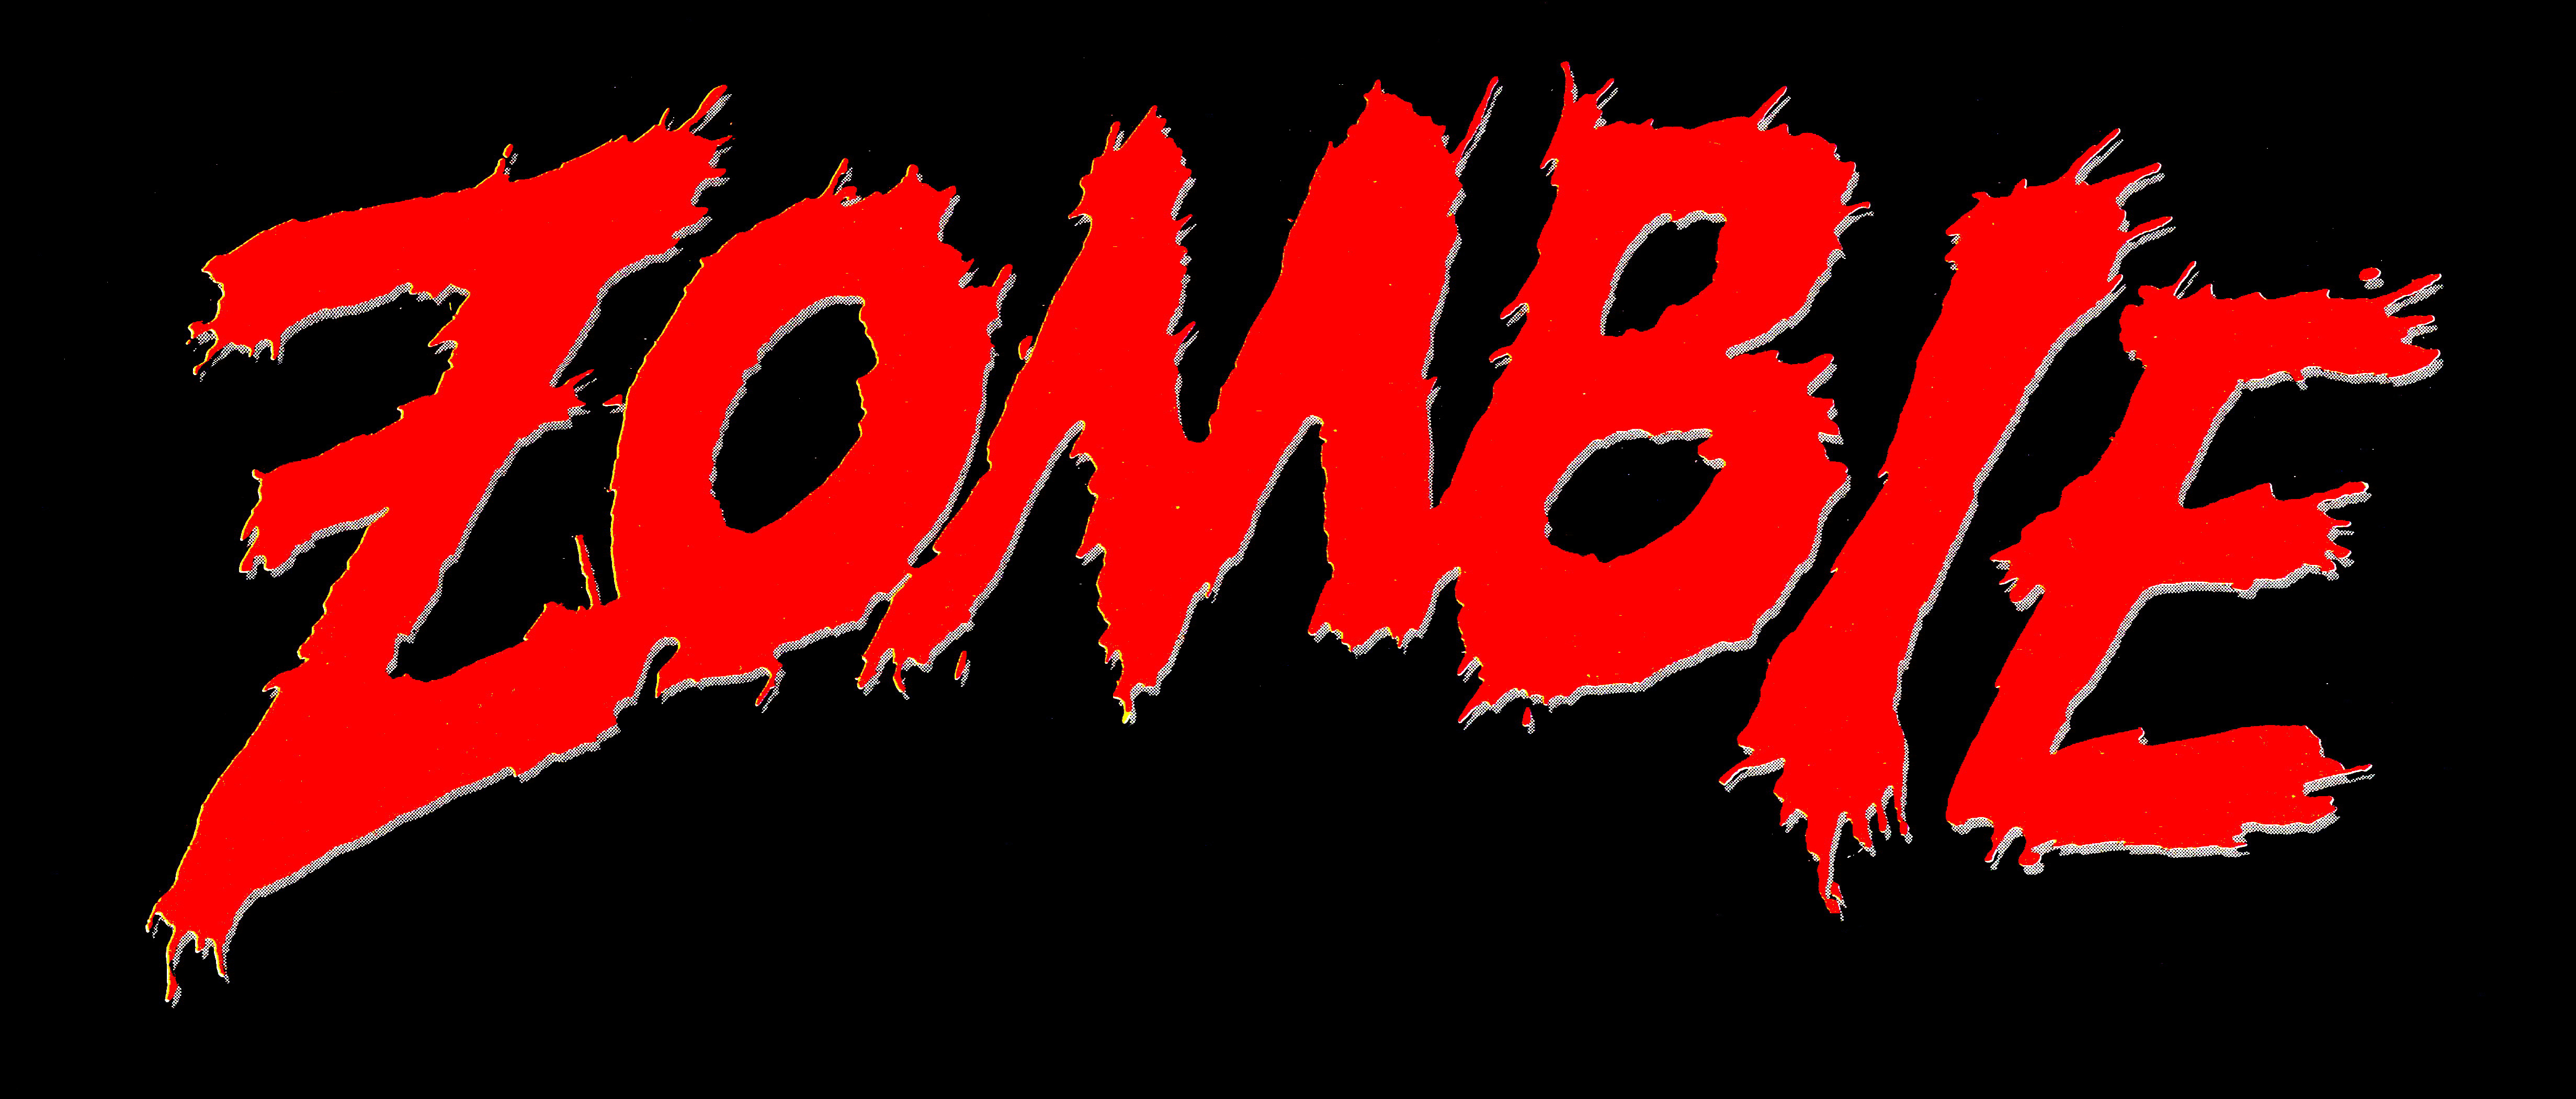 Dawn of the Dead Logo - File:Zombie - Dawn of the Dead Schriftzug.png - Wikimedia Commons